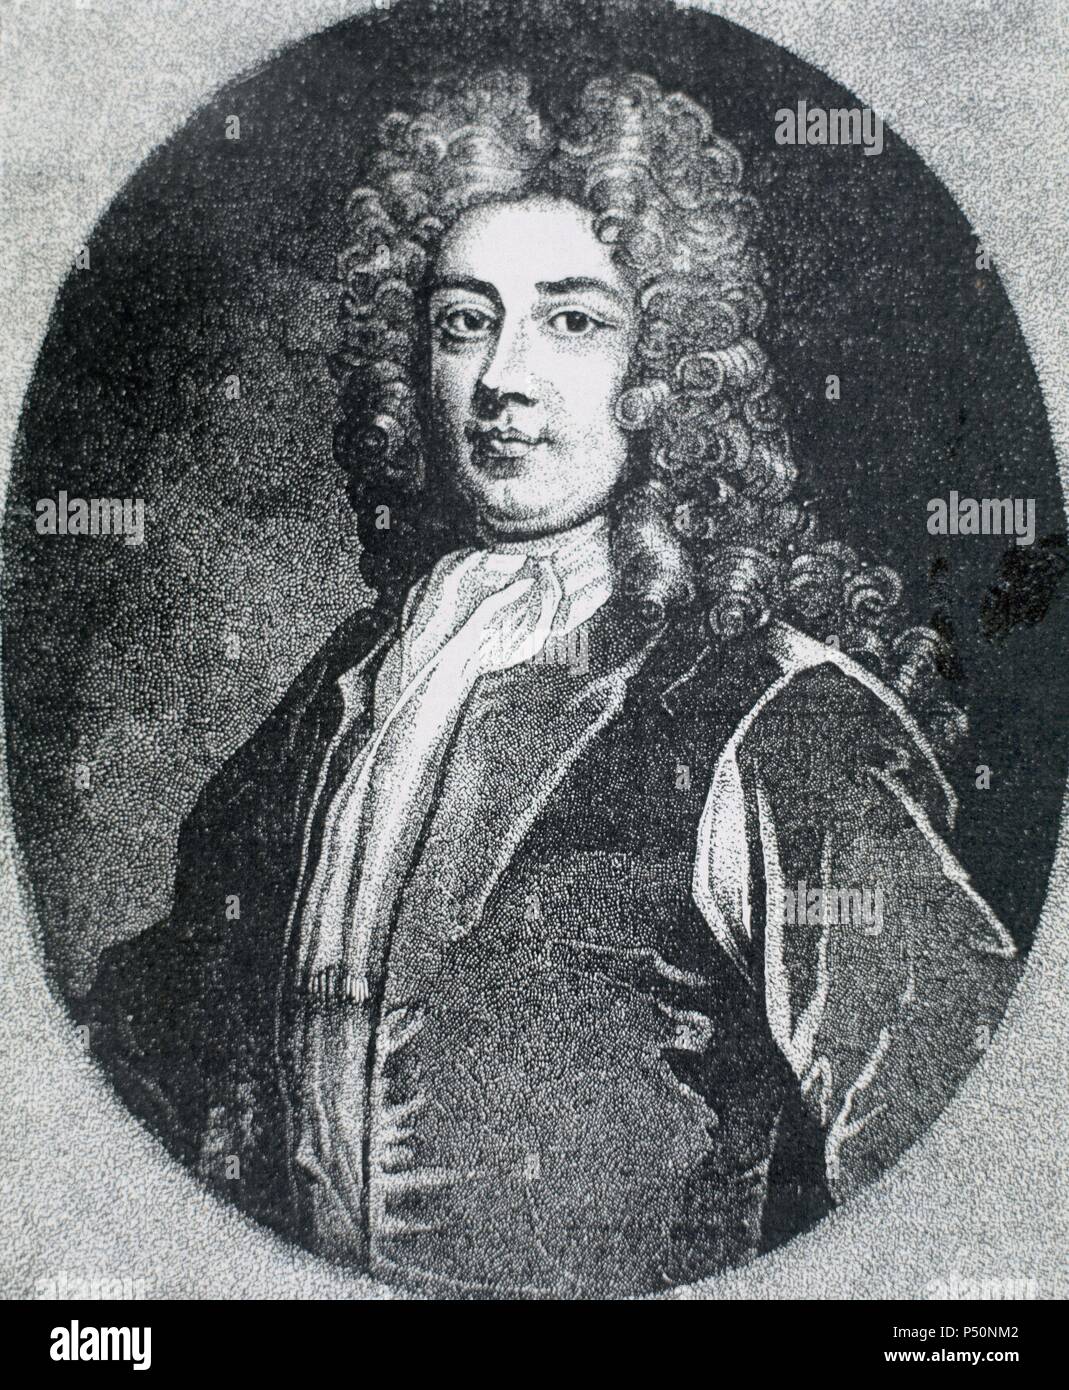 WALPOLE, Sir Robert (Houghton ,1676-London, 1745). First Earl of Oxford. English politician. Member of the House of Commons since 1701, he emerged as one of the leaders of the Whig party and served as secretary of war in 1708. Accused of corruption was expelled from Parliament and imprisoned in the Tower of London. Engraving. Stock Photo